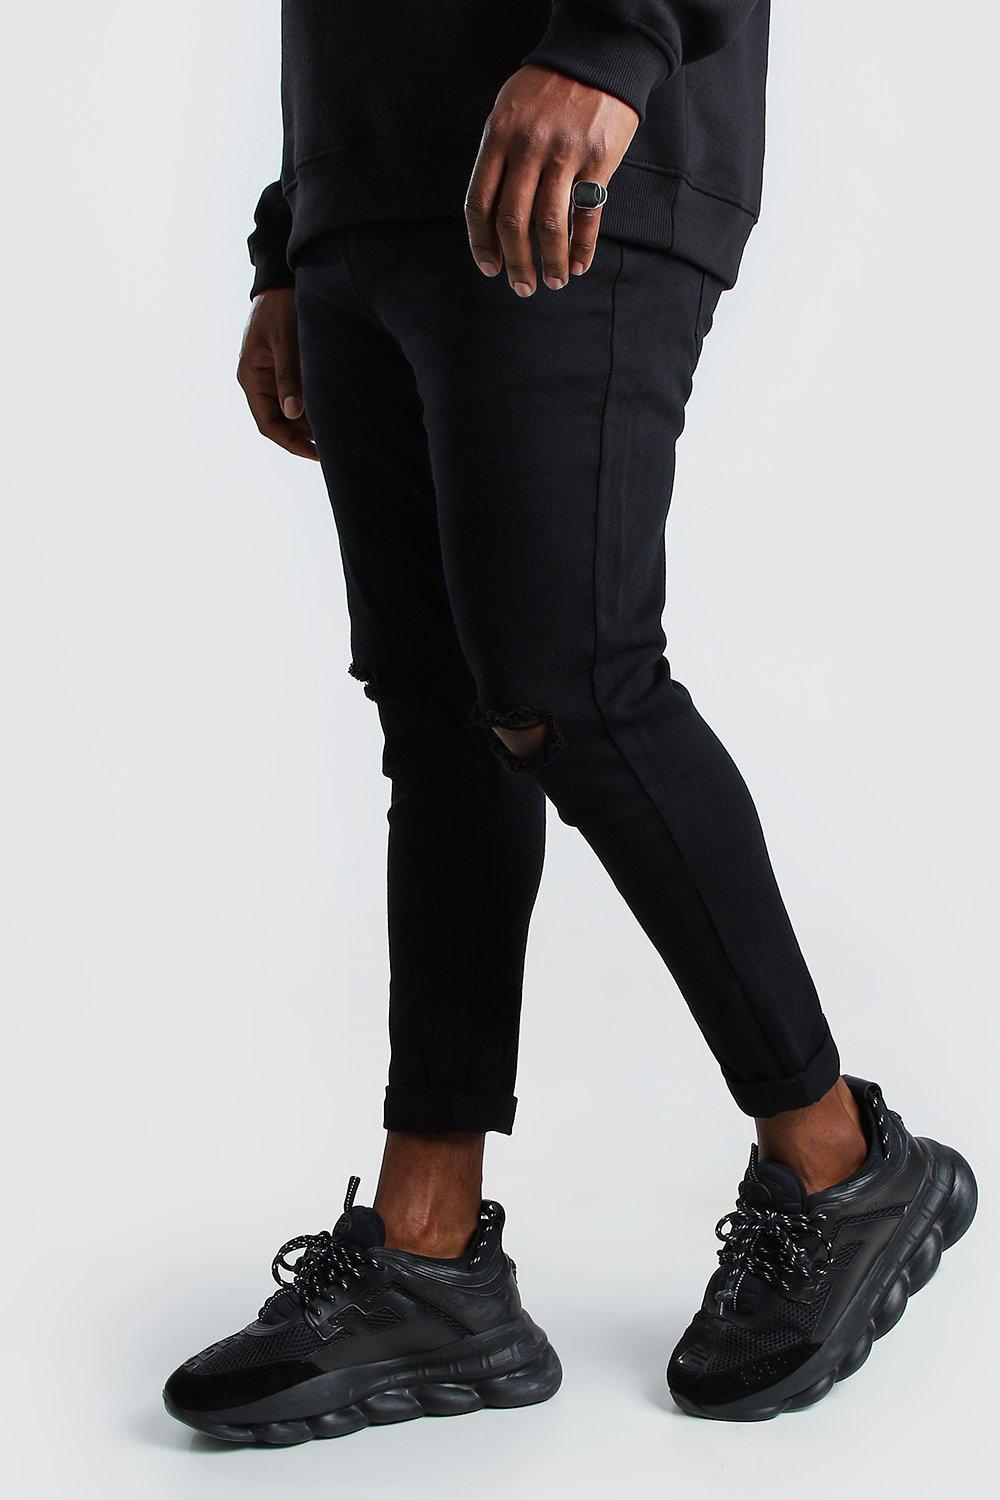 black ripped jeans mens big and tall